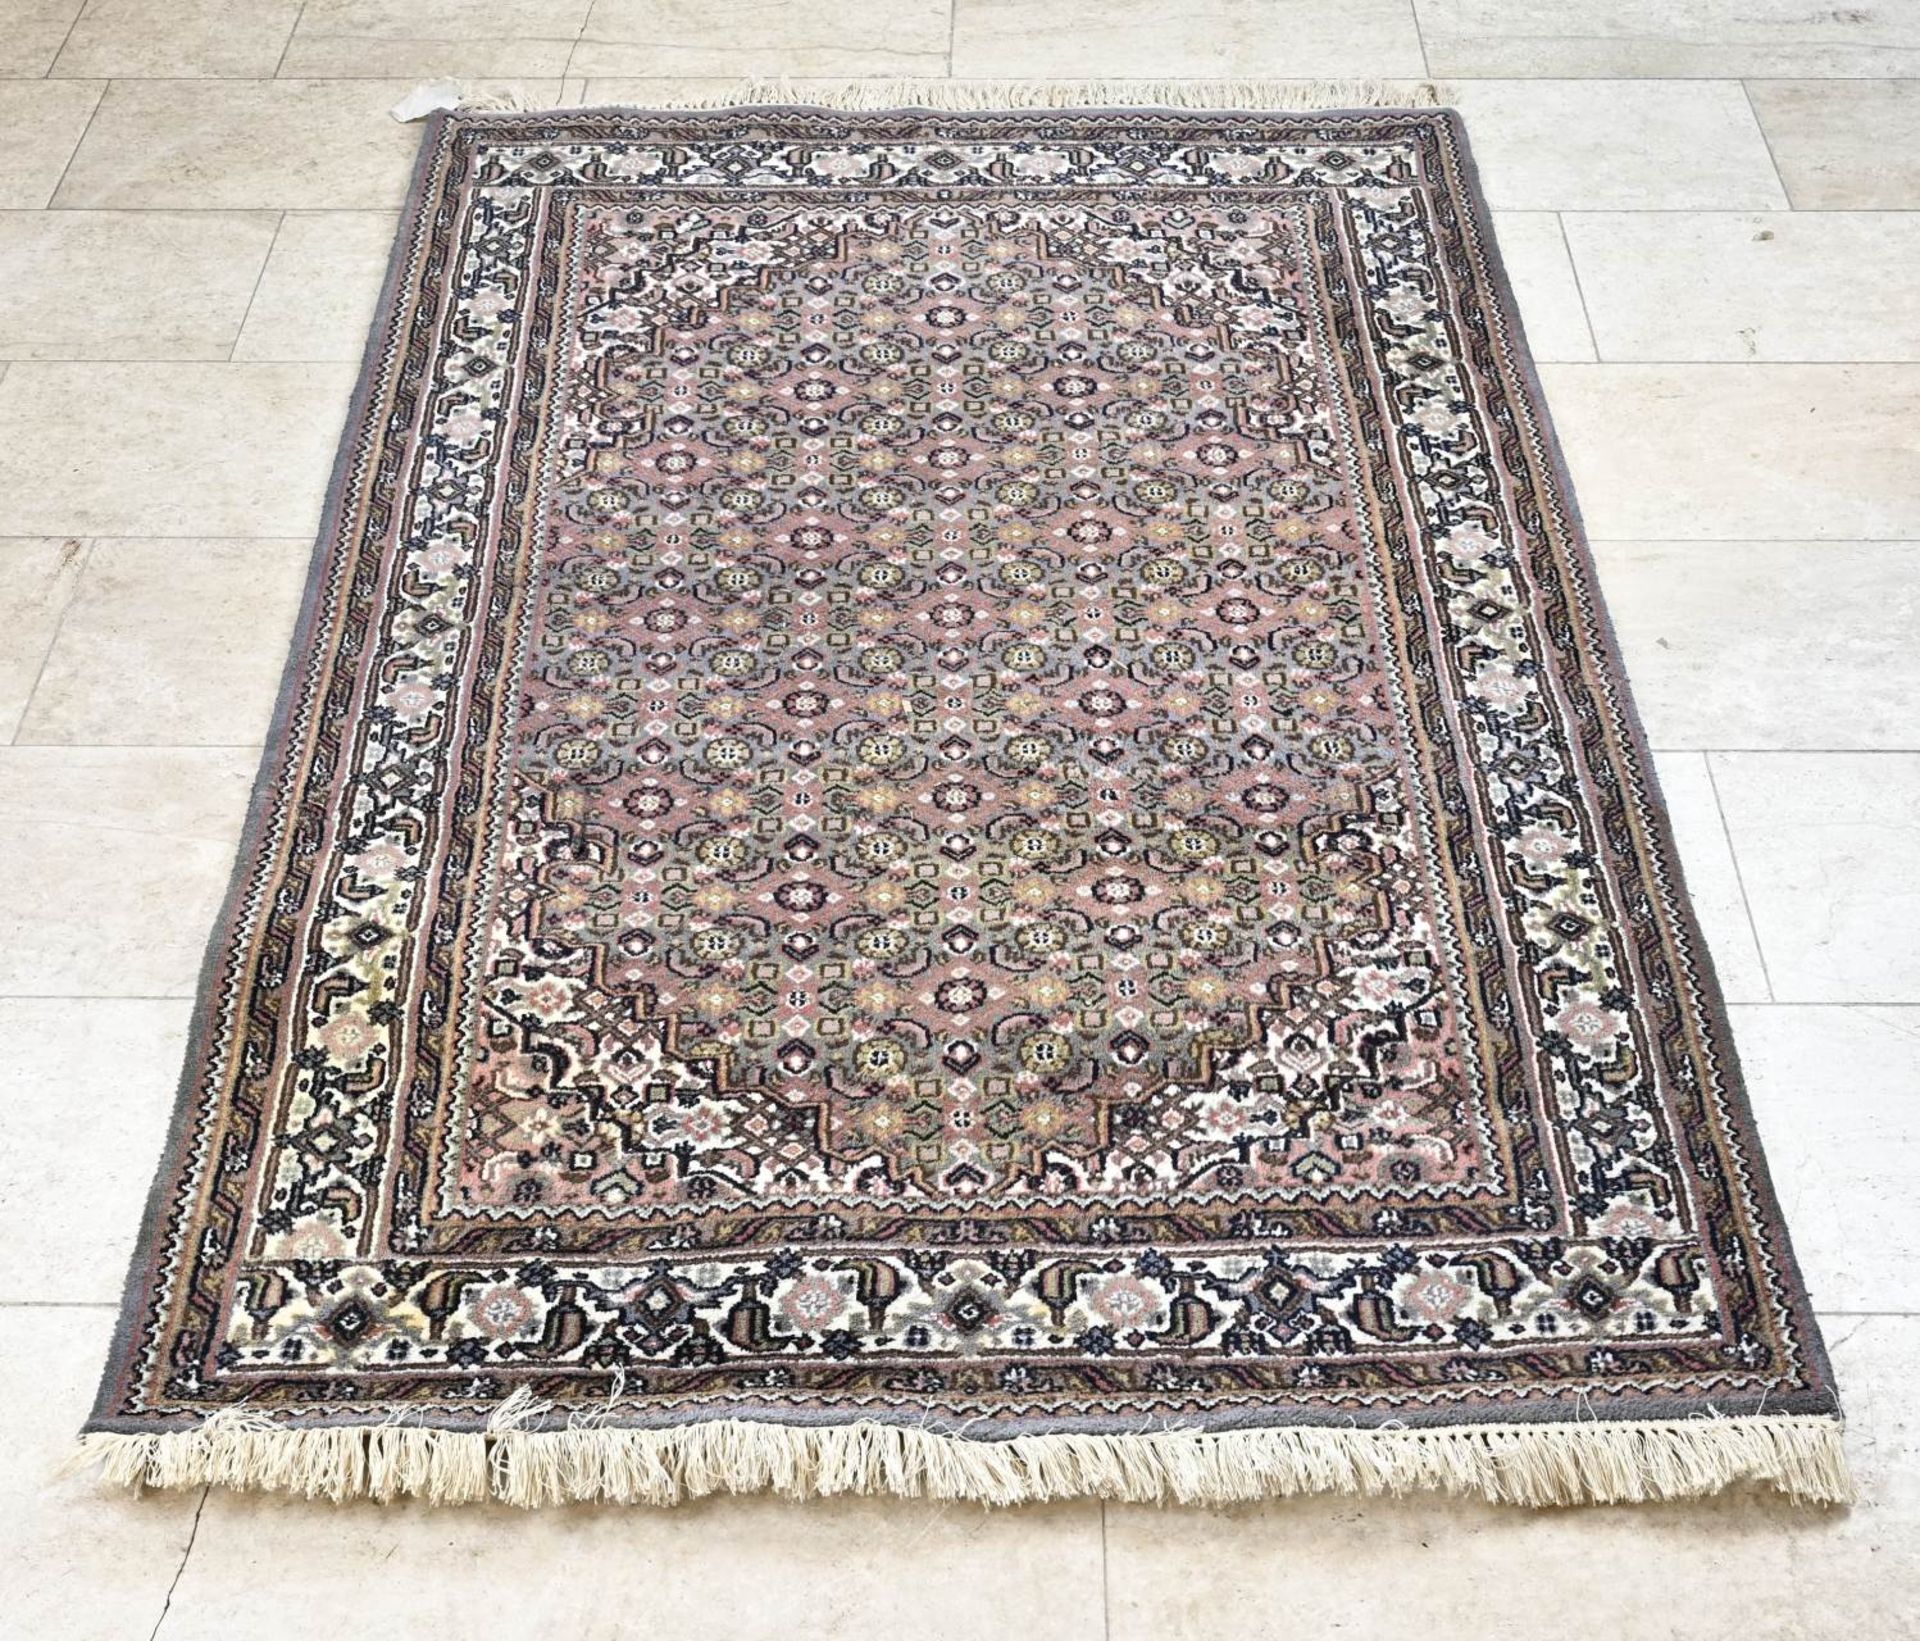 Hand-knotted Persian carpet, 188 x 127 cm.